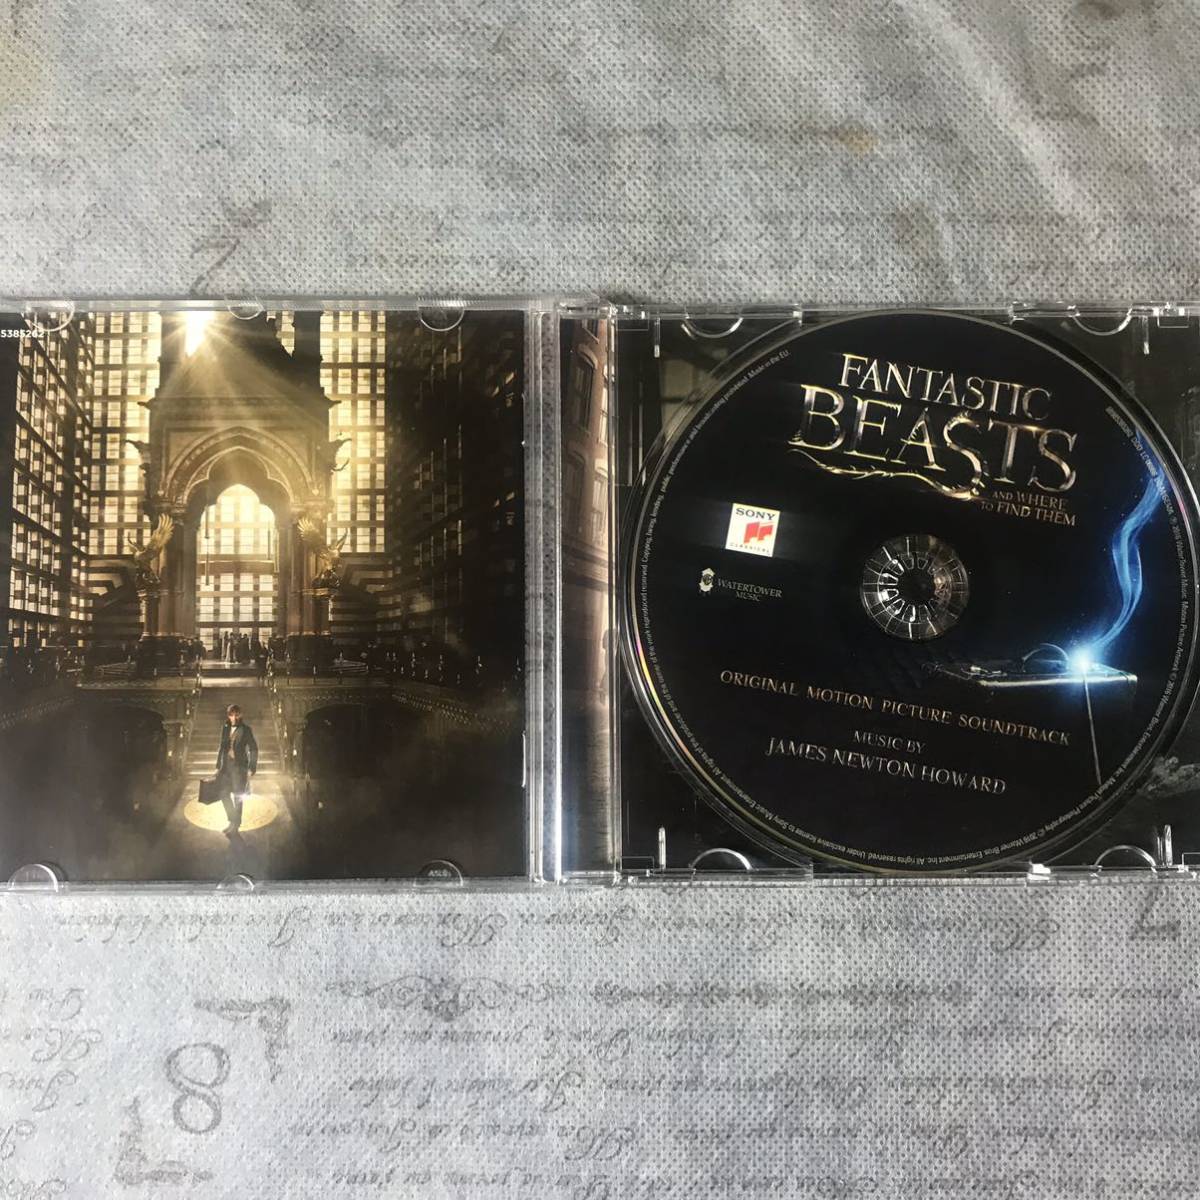 ★FANTASTIC BEASTS AND WHERE TO FIND THEM ORIGINAL MOTION PICTURE SOUNDTRACK hf8bの画像2